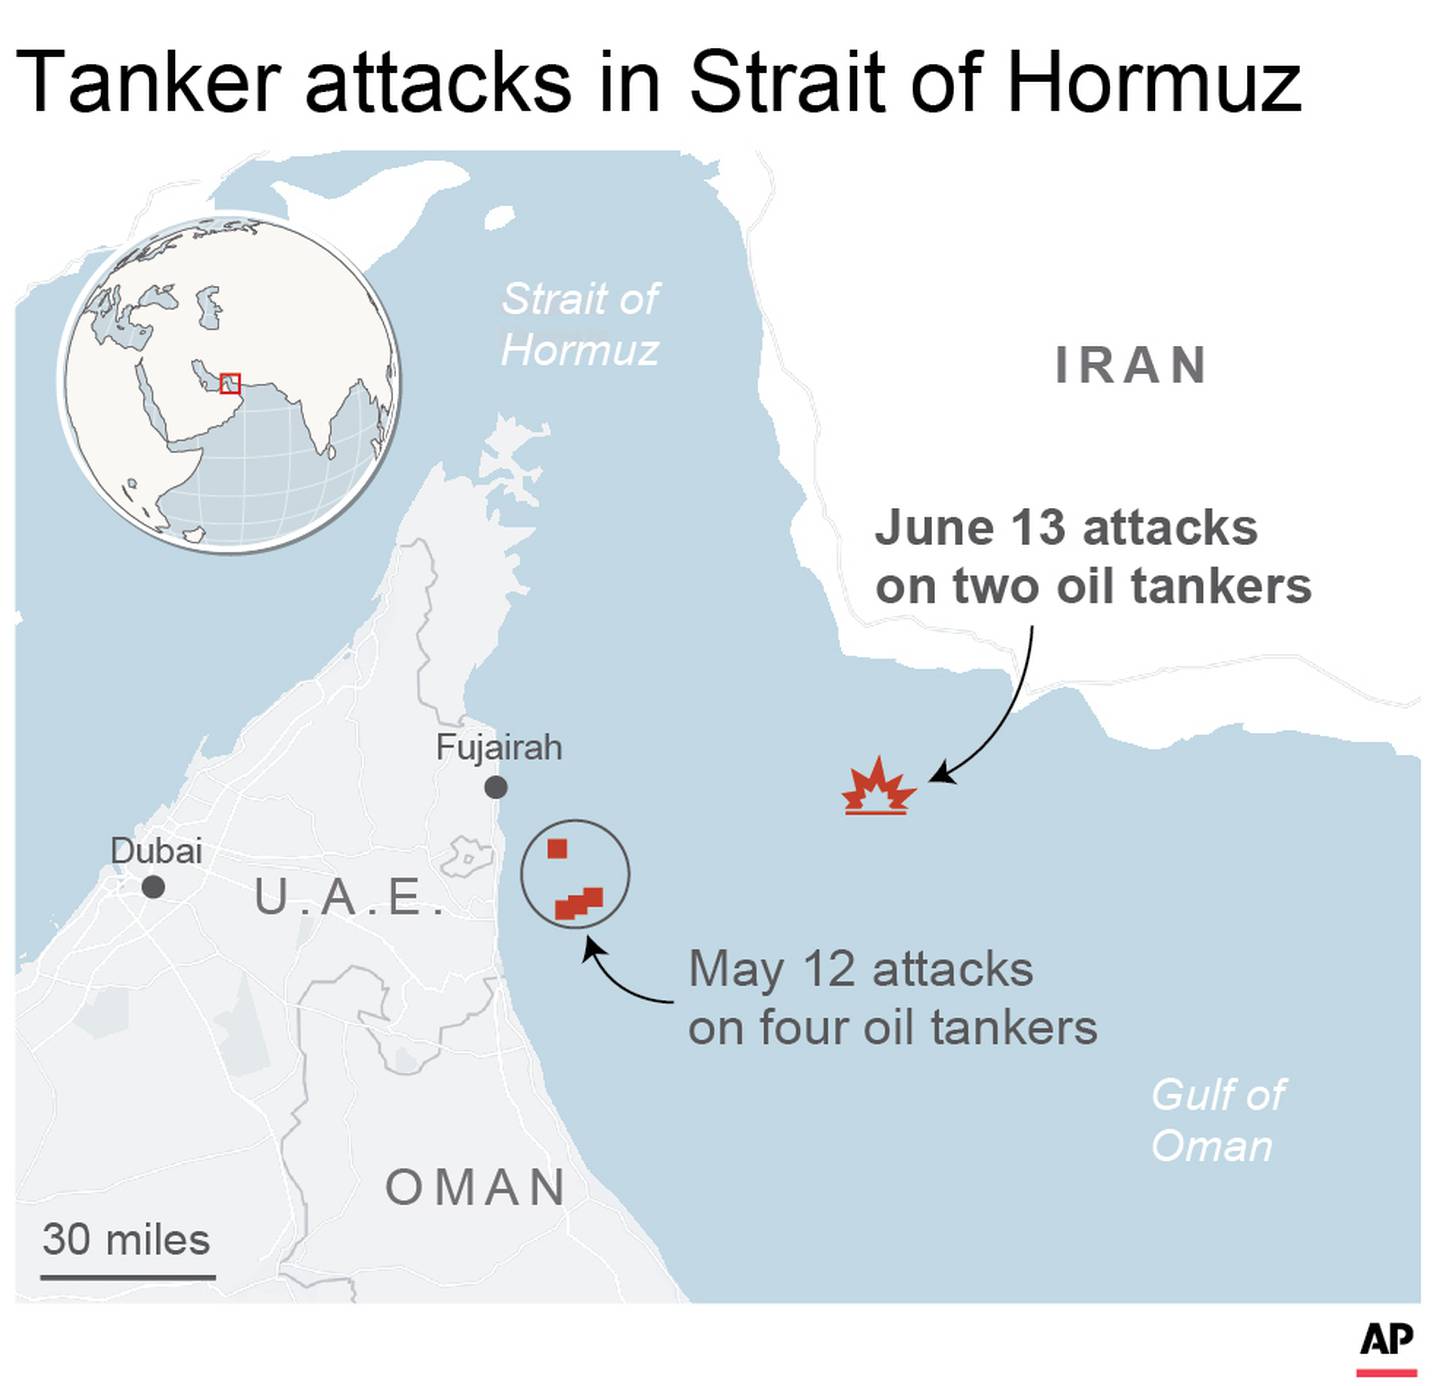 Map locates recent attacks on oil tankers in the Strait of Hormuz